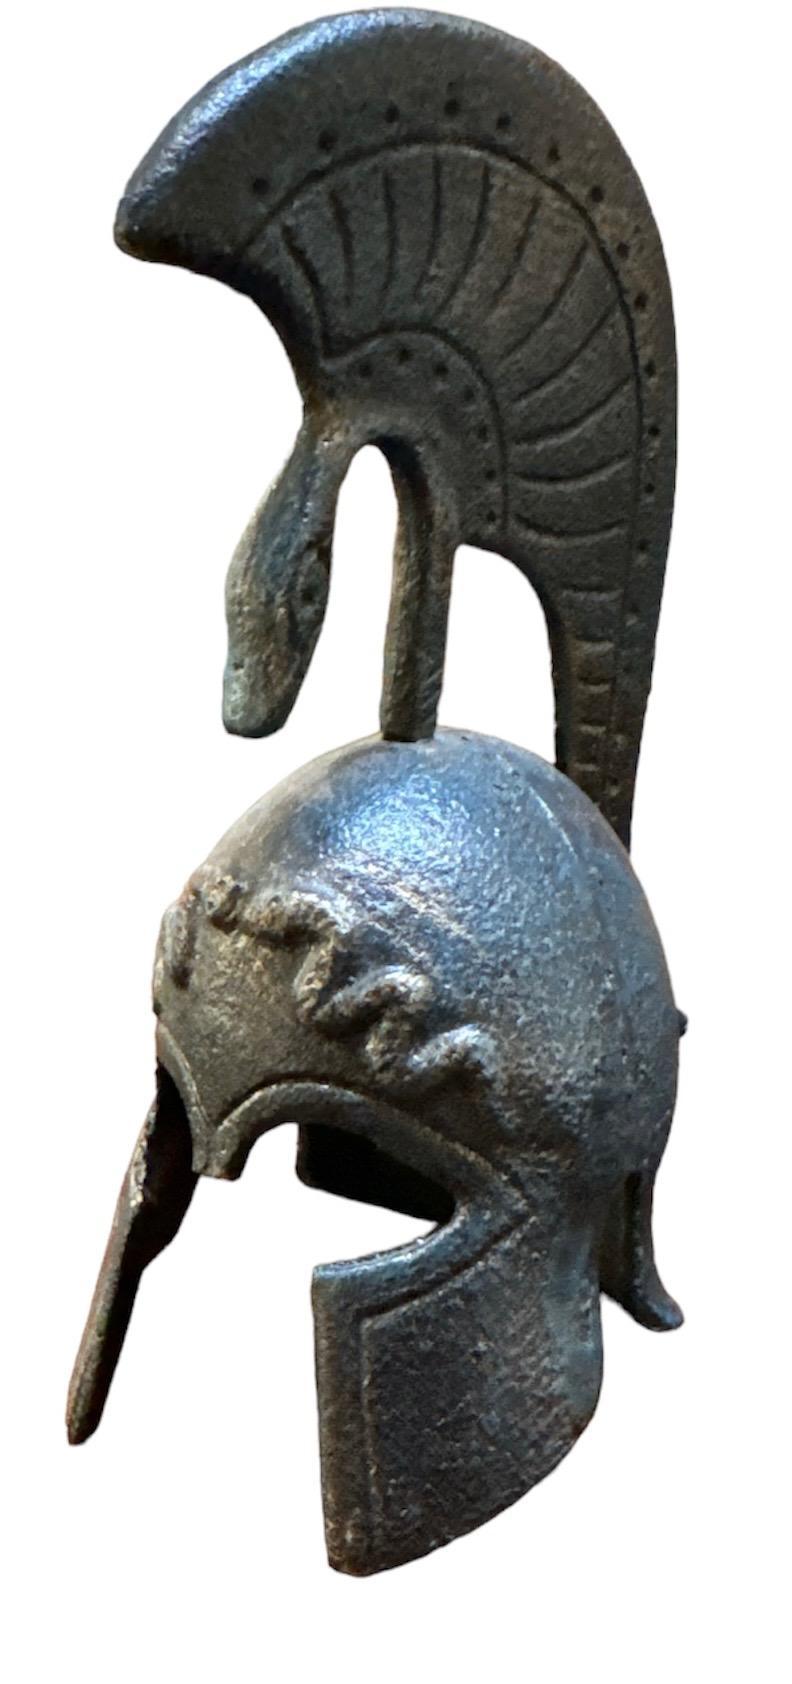 Ancient Greek Bronze Spartan Corinthian Helmet in a miniature size. Womderful desk weight in amazing painta. Great texture and weight to this helmet. Measures approx - 5deep x 3.5 wide x 6 high
